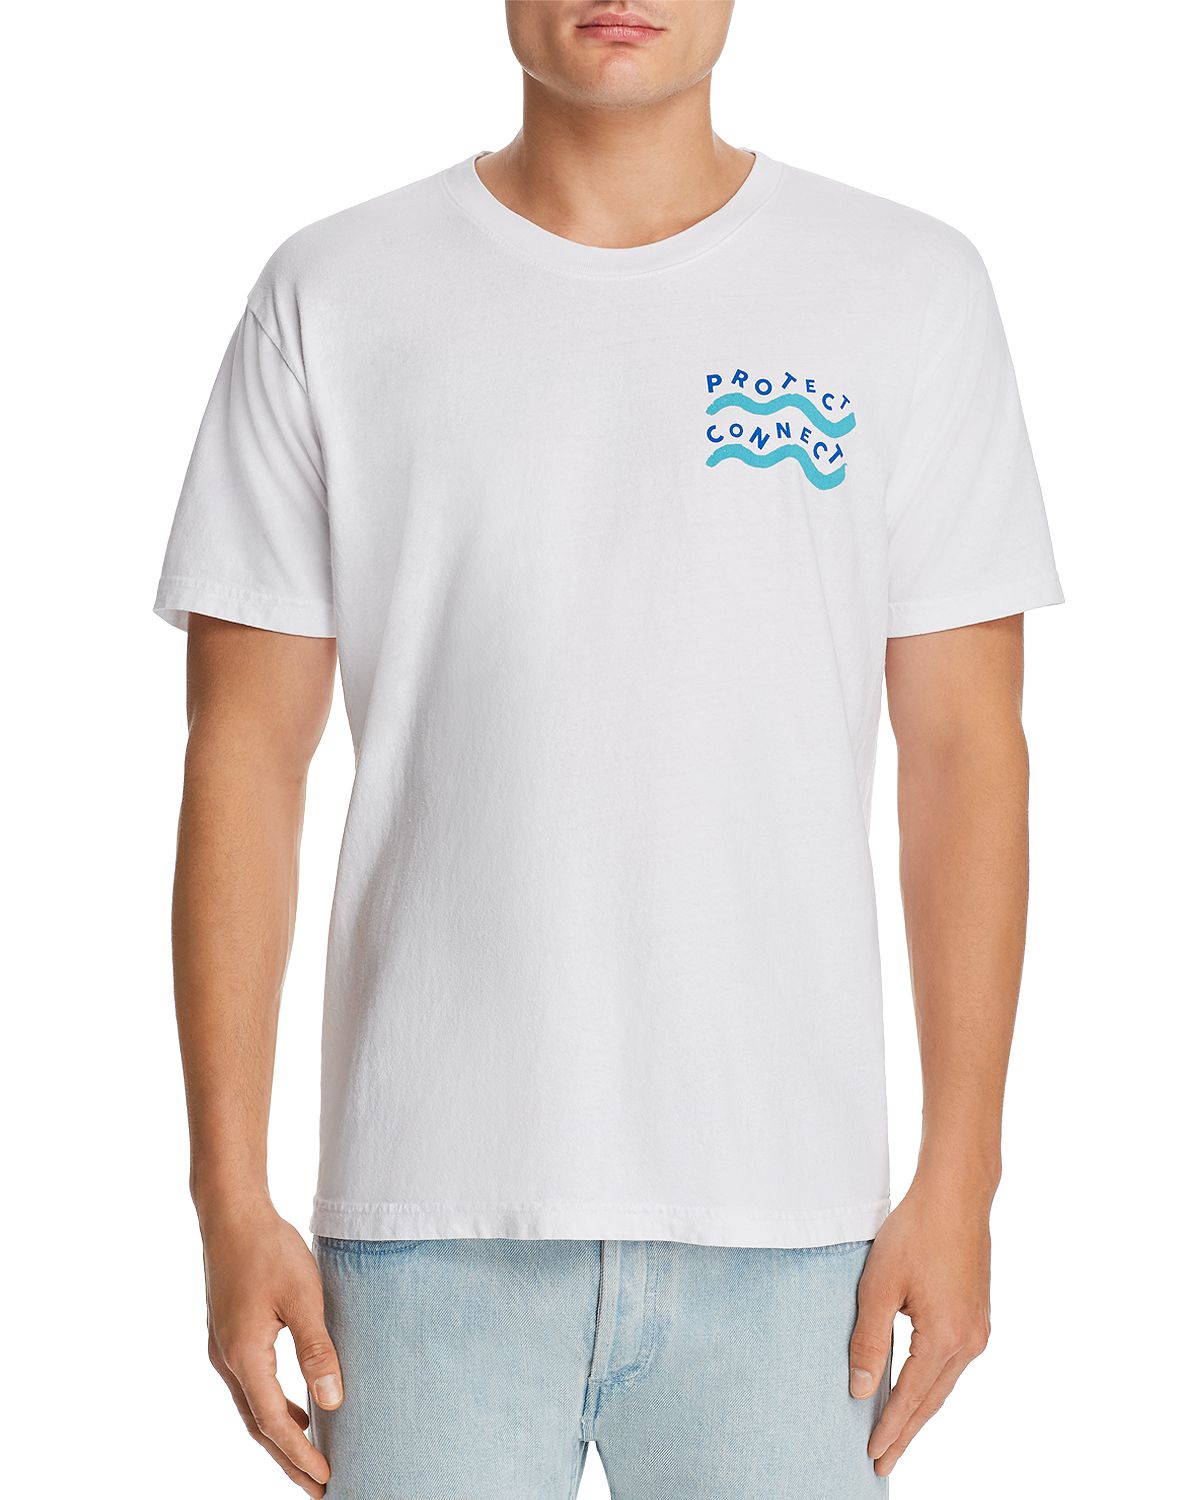 Everybody.world X Kelly Anna Protect Connect Graphic Tee White